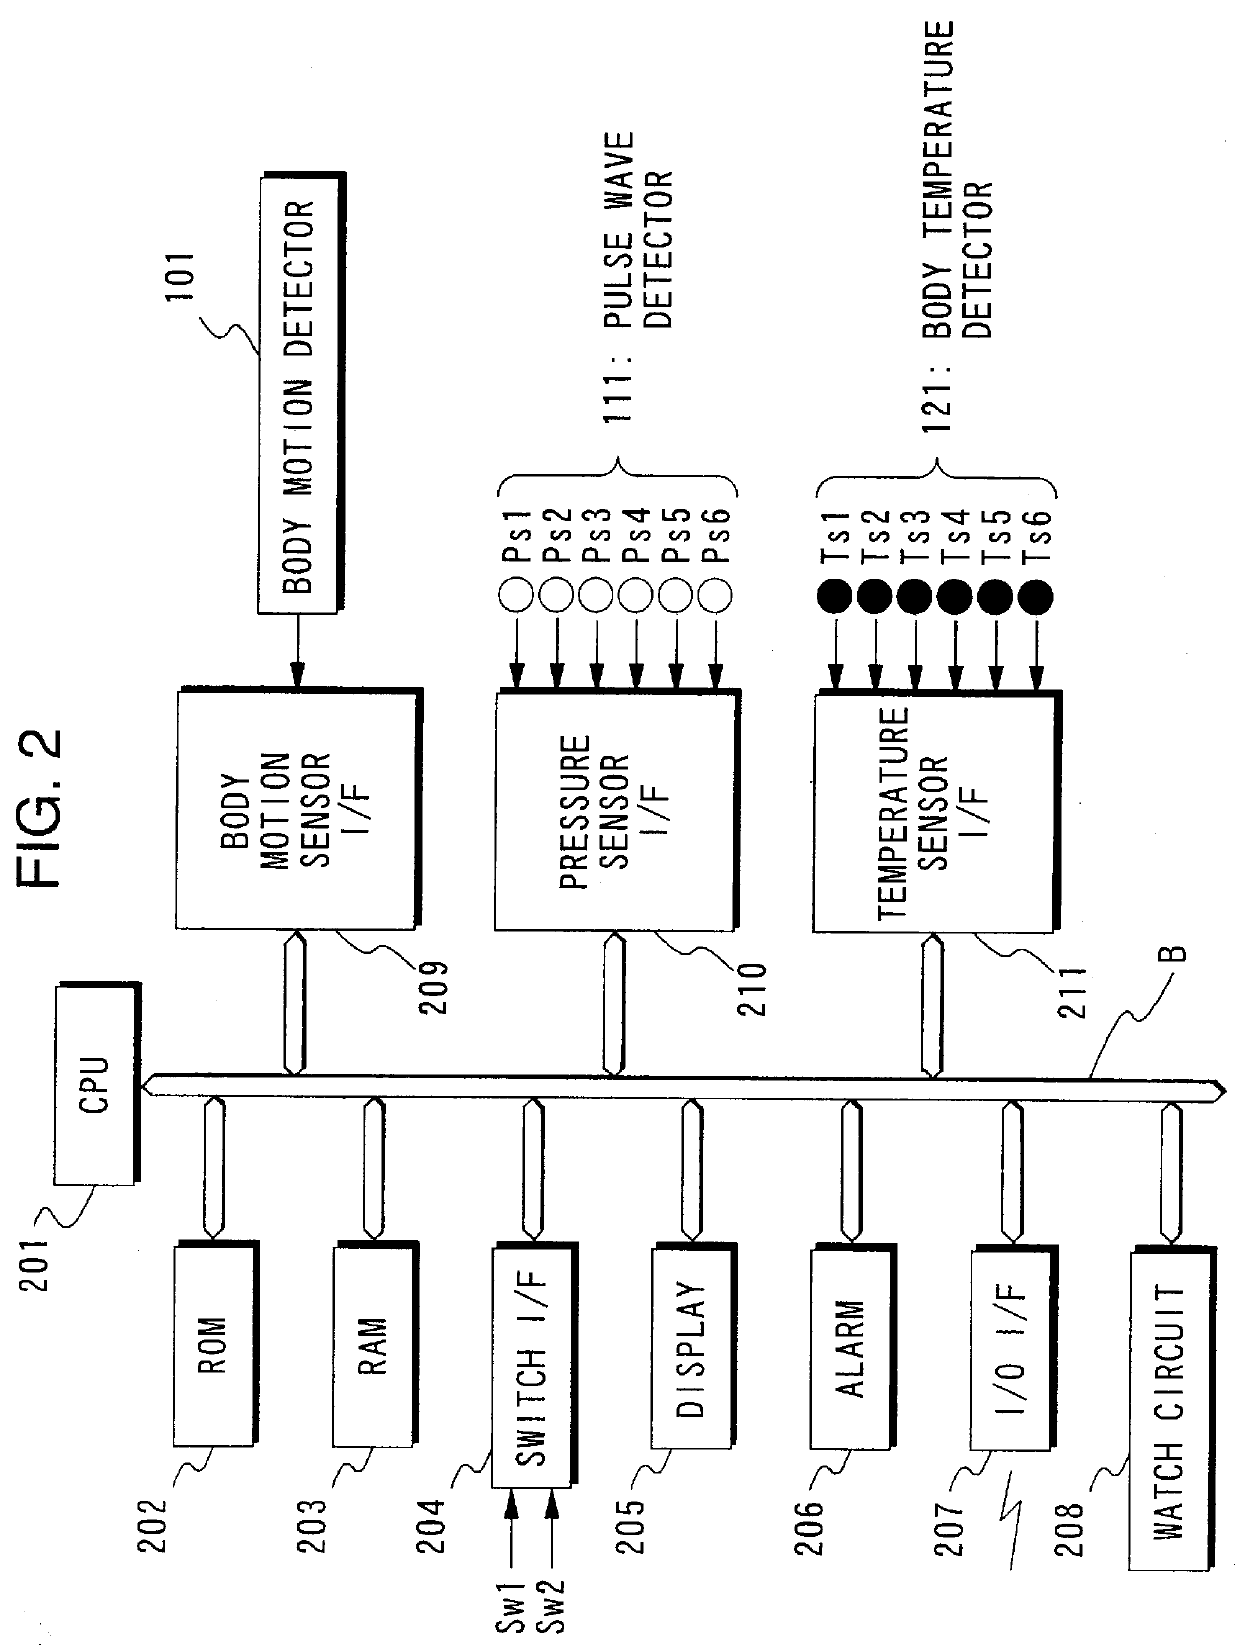 Device for measuring calorie expenditure and device for measuring body temperature